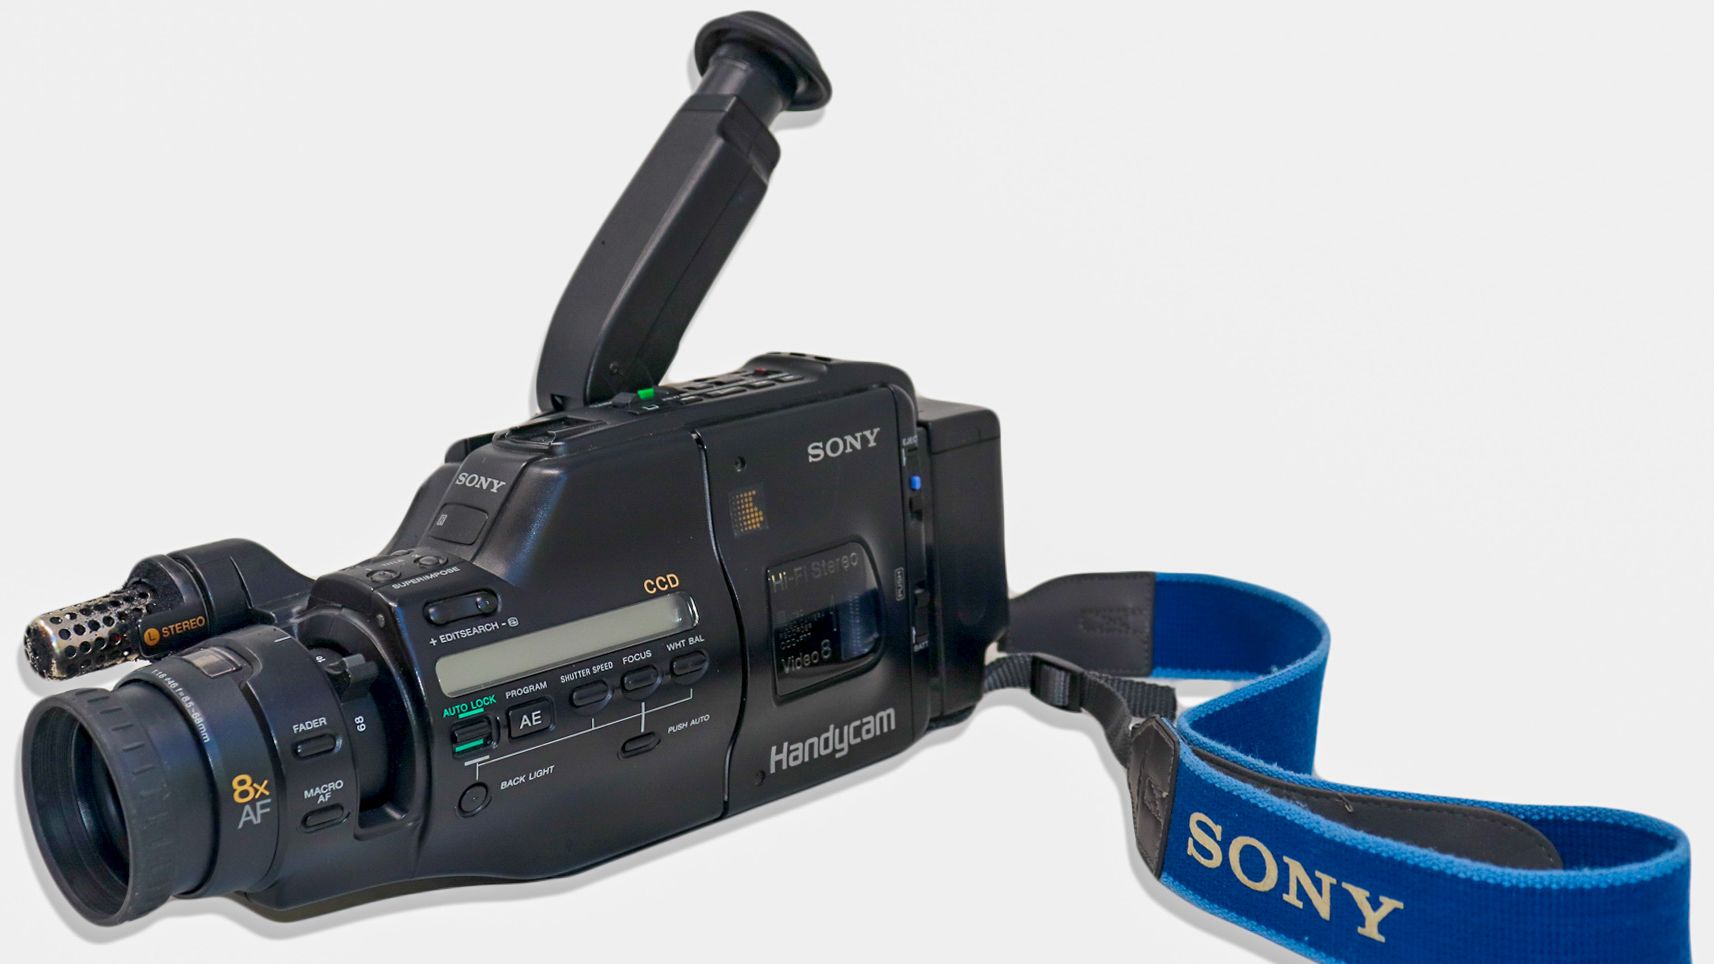 This Sony camera was used by Holliday to film the incident from his apartment.